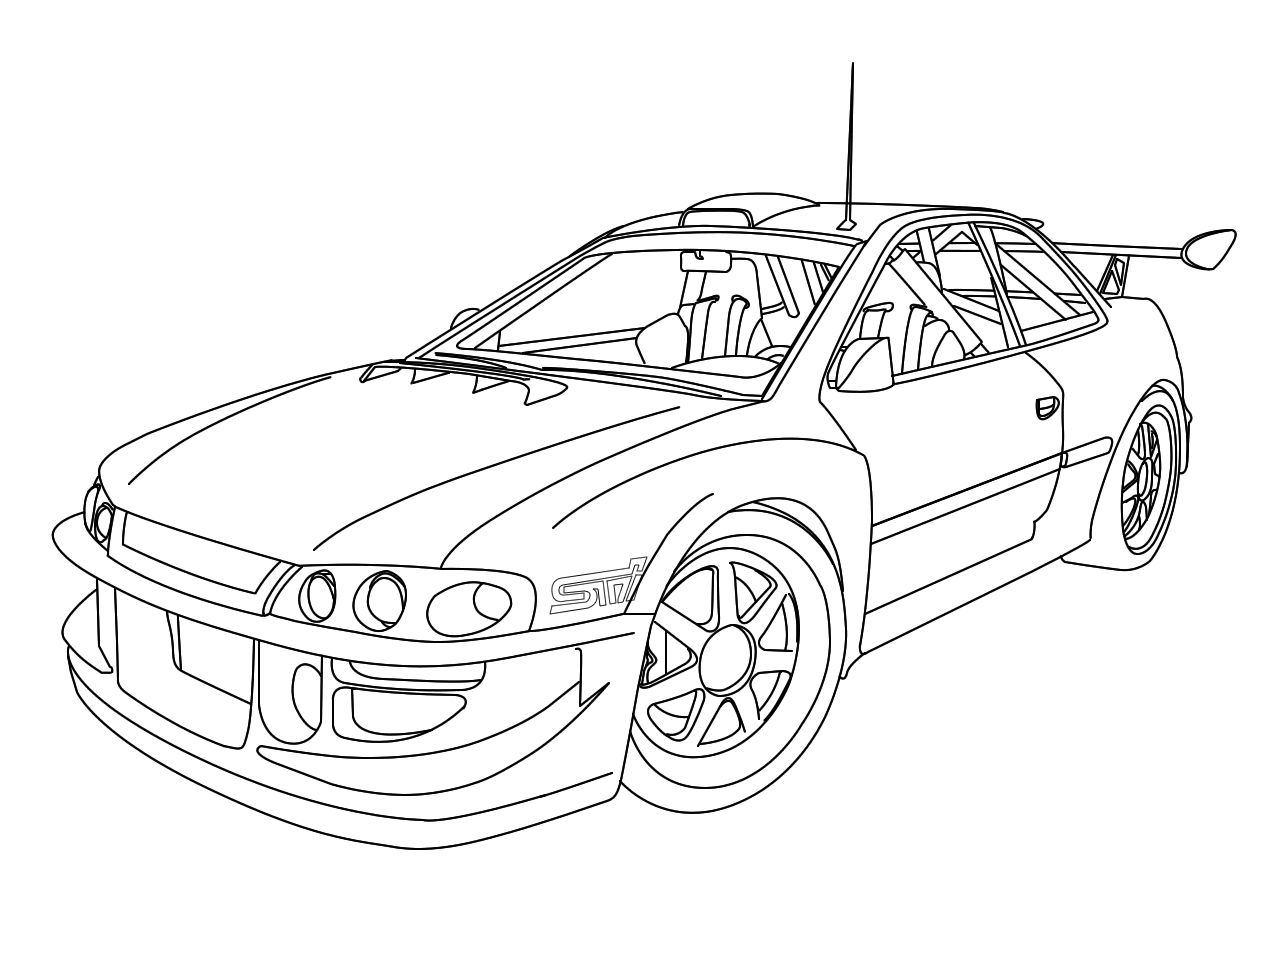 Subaru car coloring pages cars coloring pages coloring pages coloring for kids